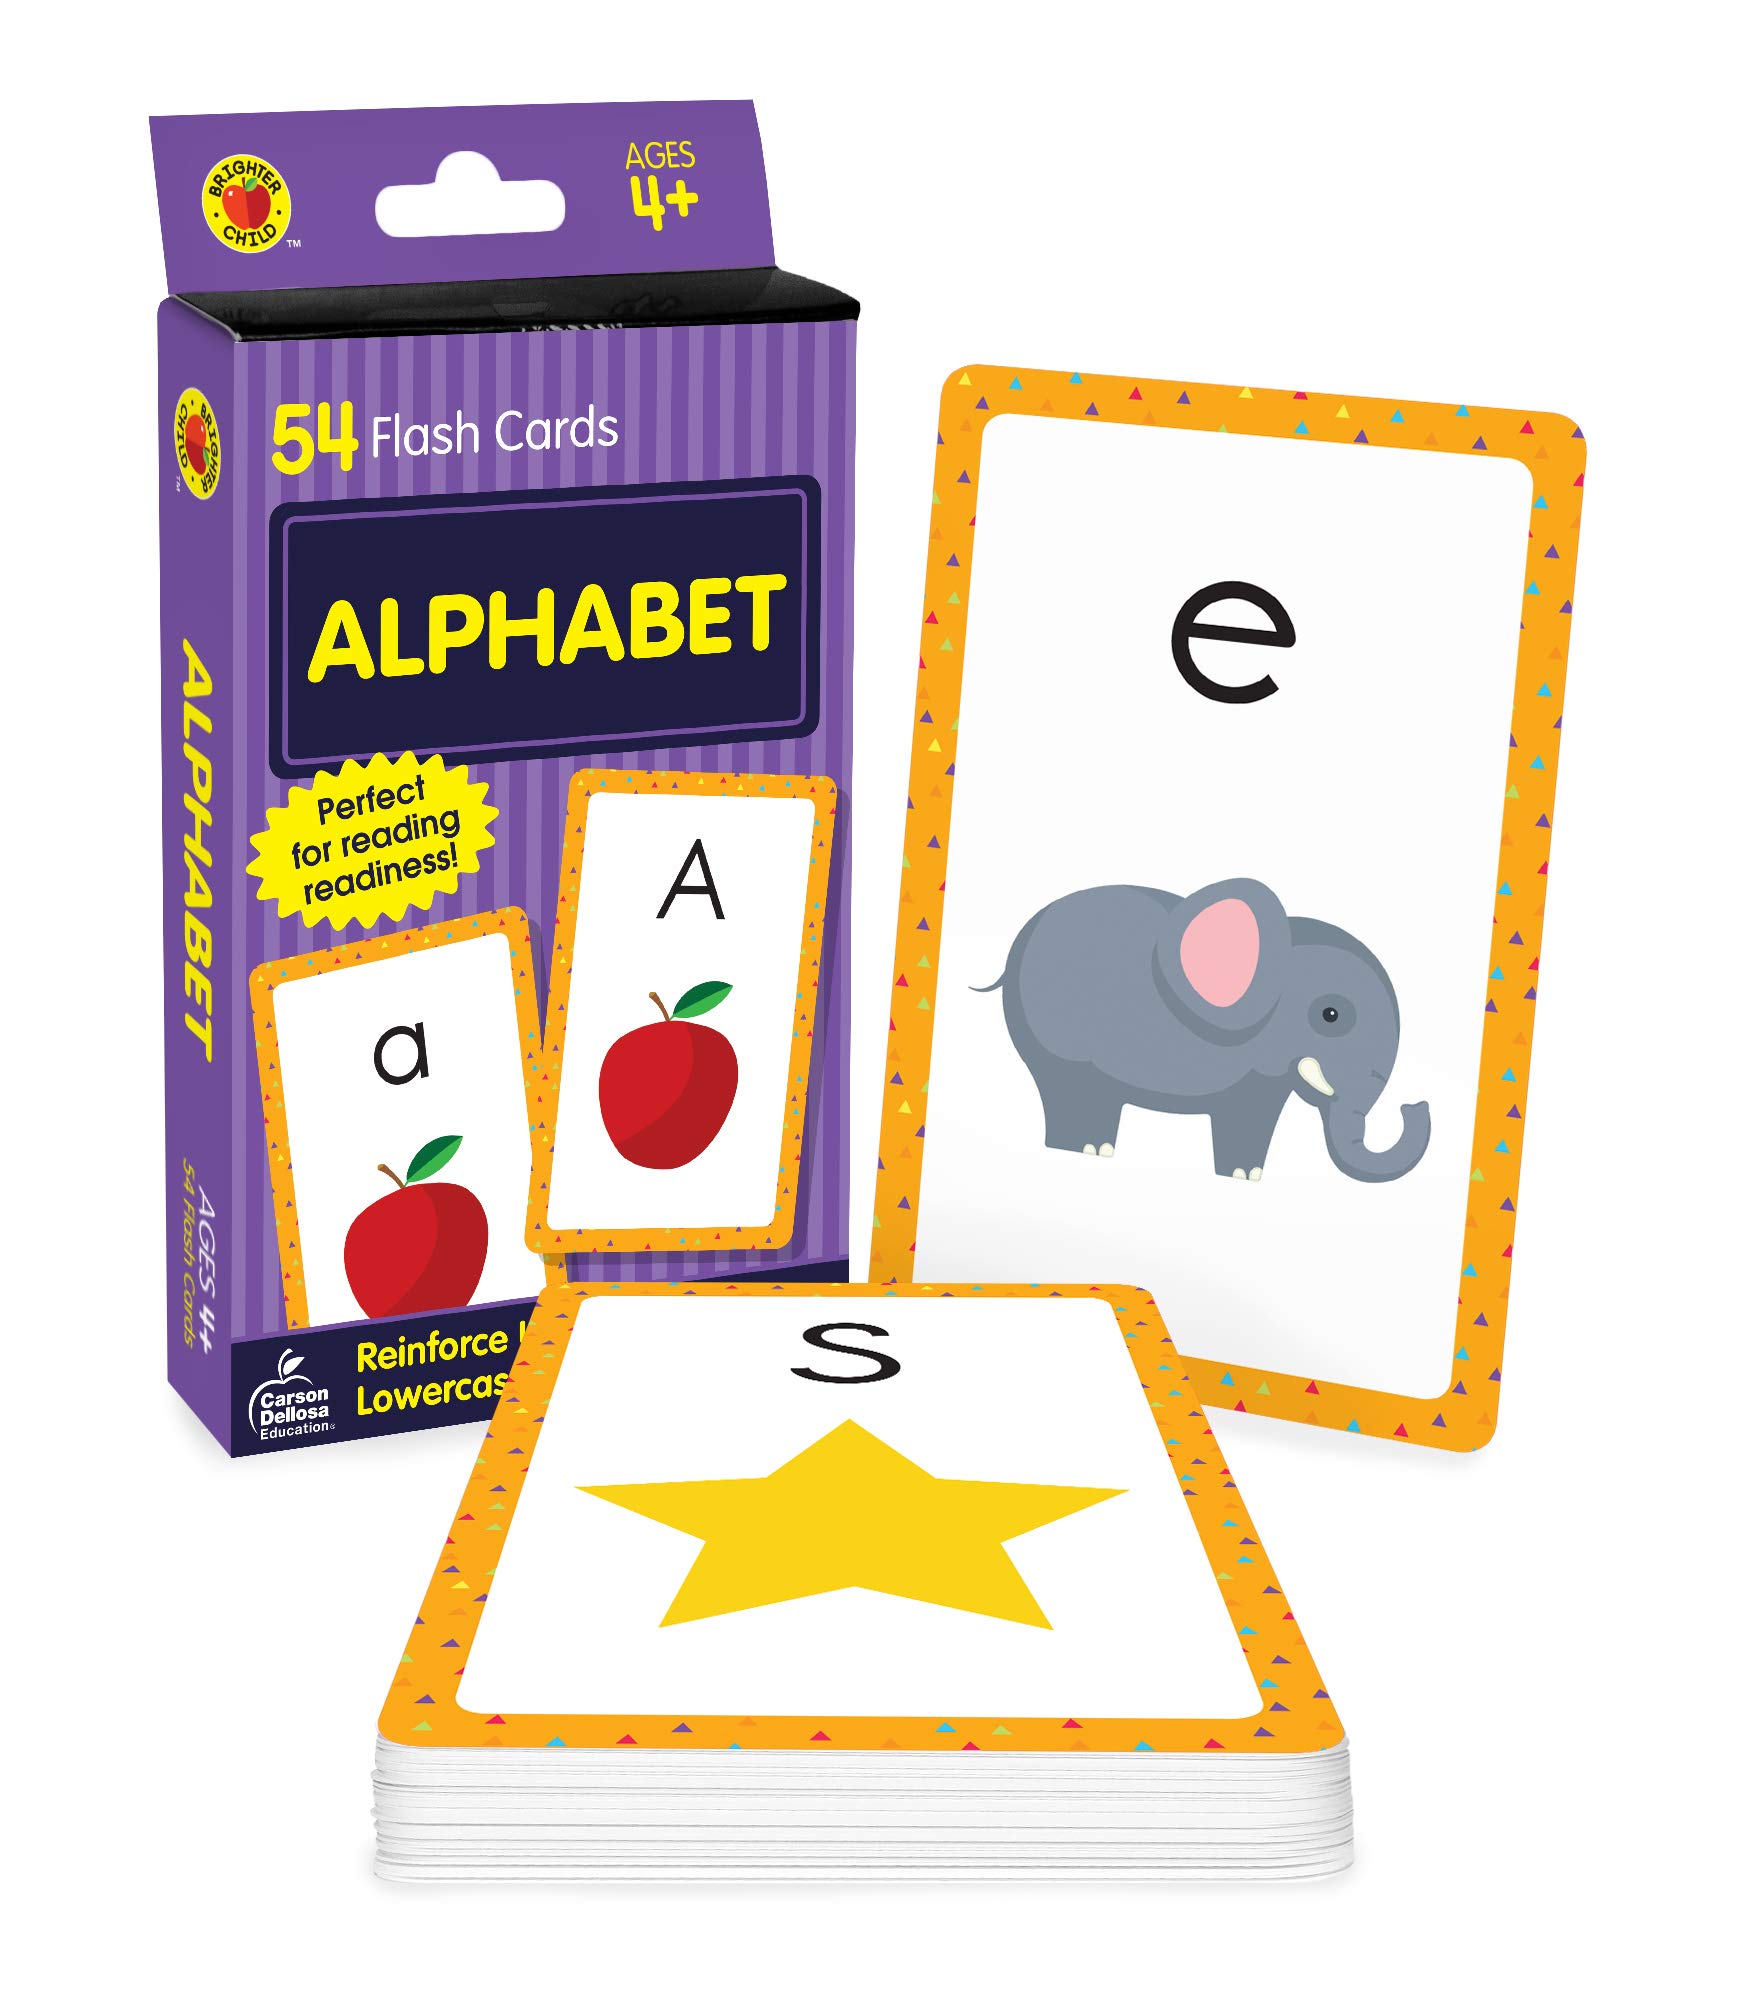 Carson Dellosa Alphabet Flash Cards—Double-Sided, Uppercase and Lowercase Letter and Sound Recognition With Illustrations, Early Reading Comprehension Practice Set (54 pc)